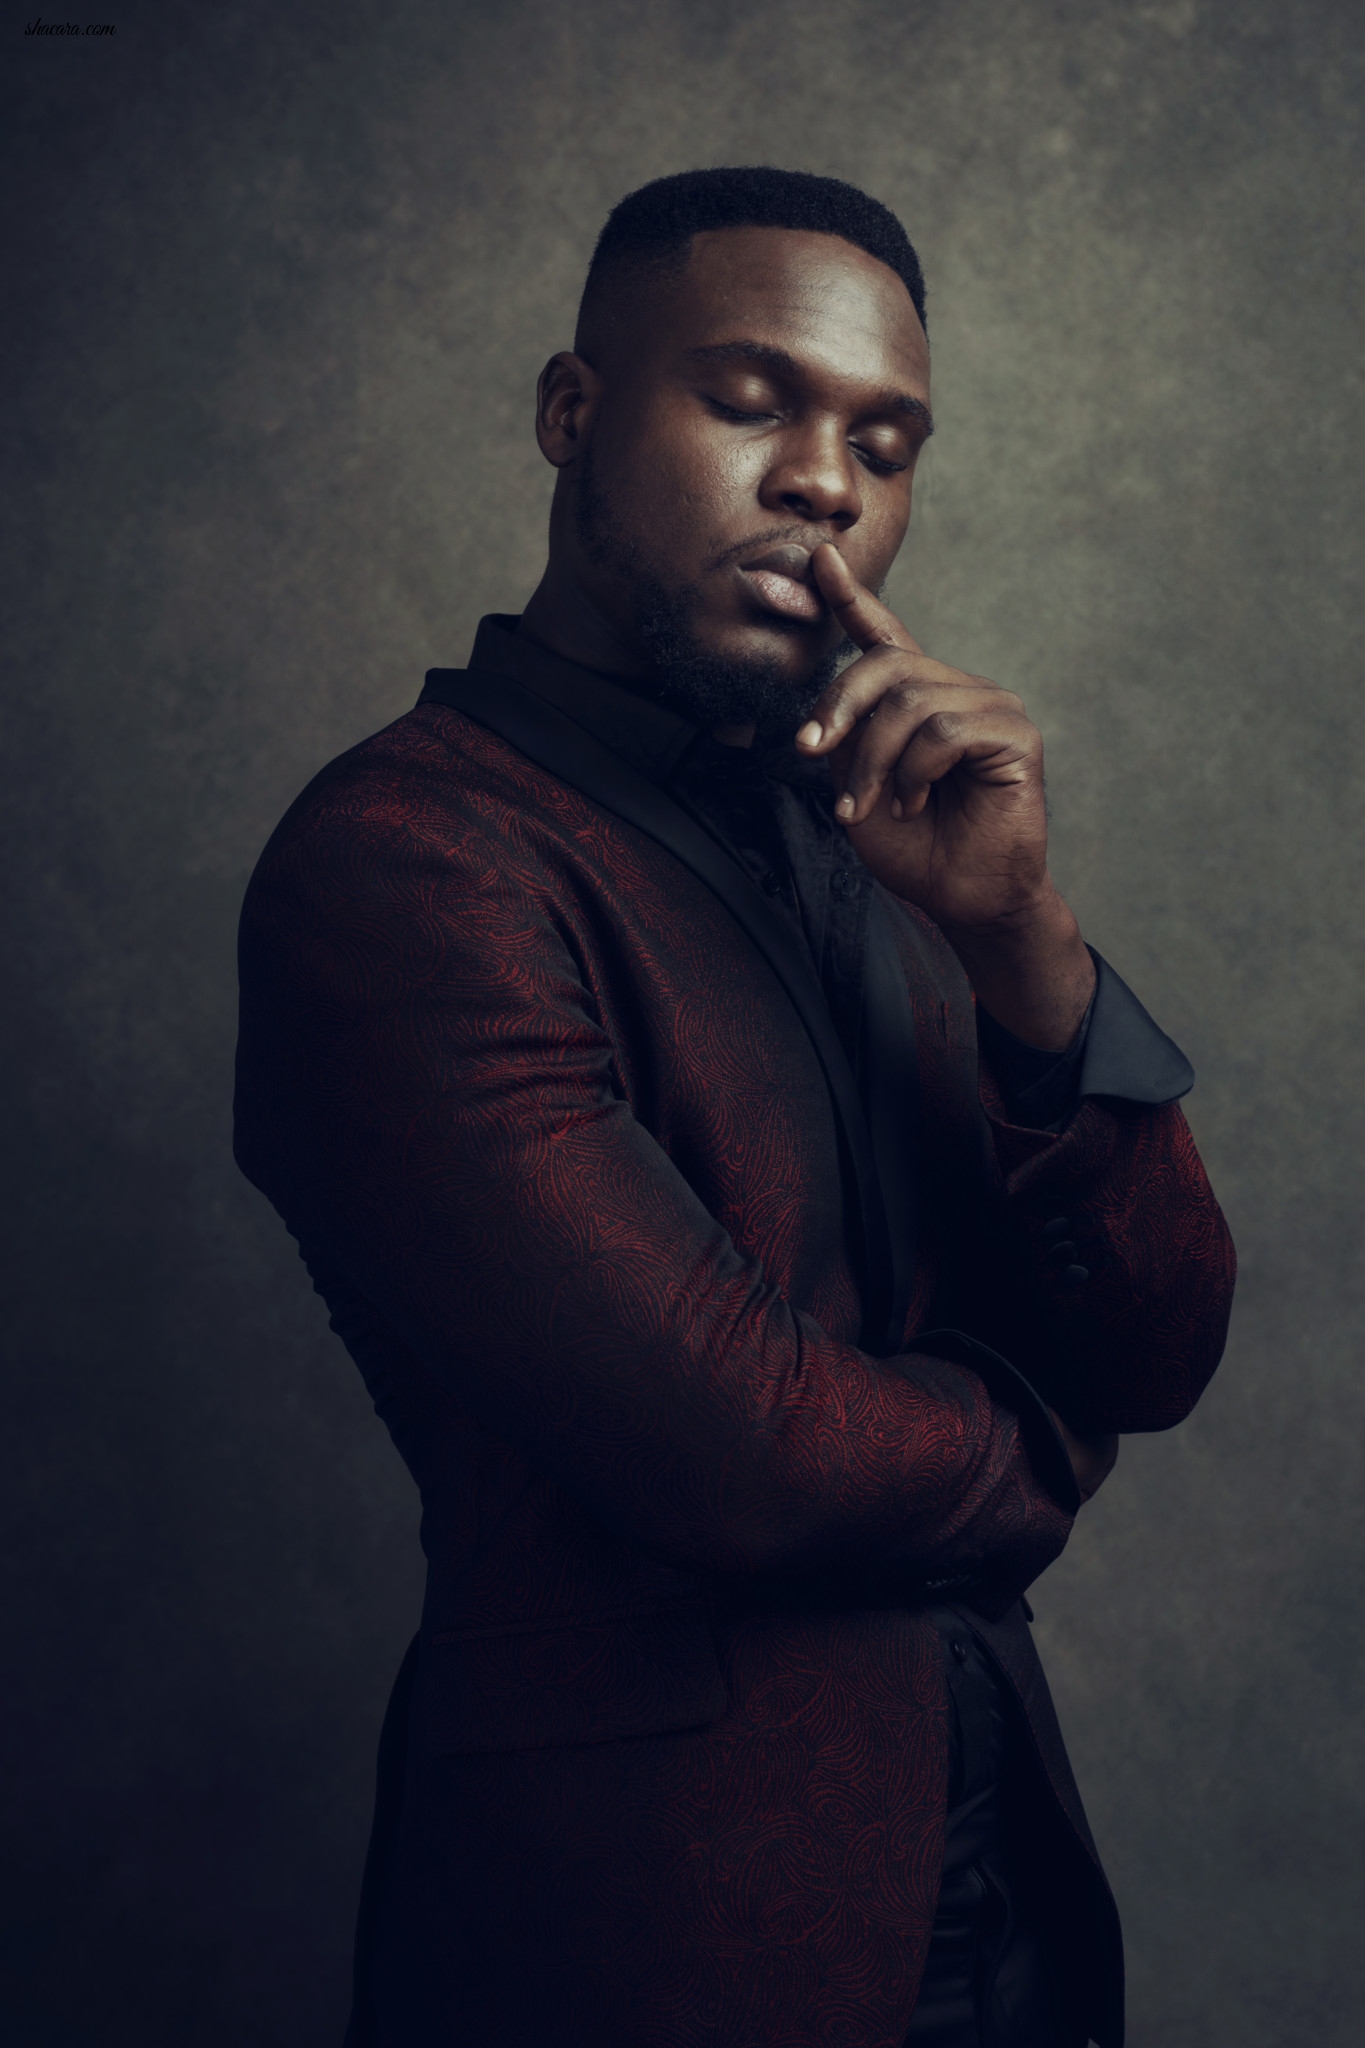 The Year Of The Gentleman! KochHouse Releases Lookbook